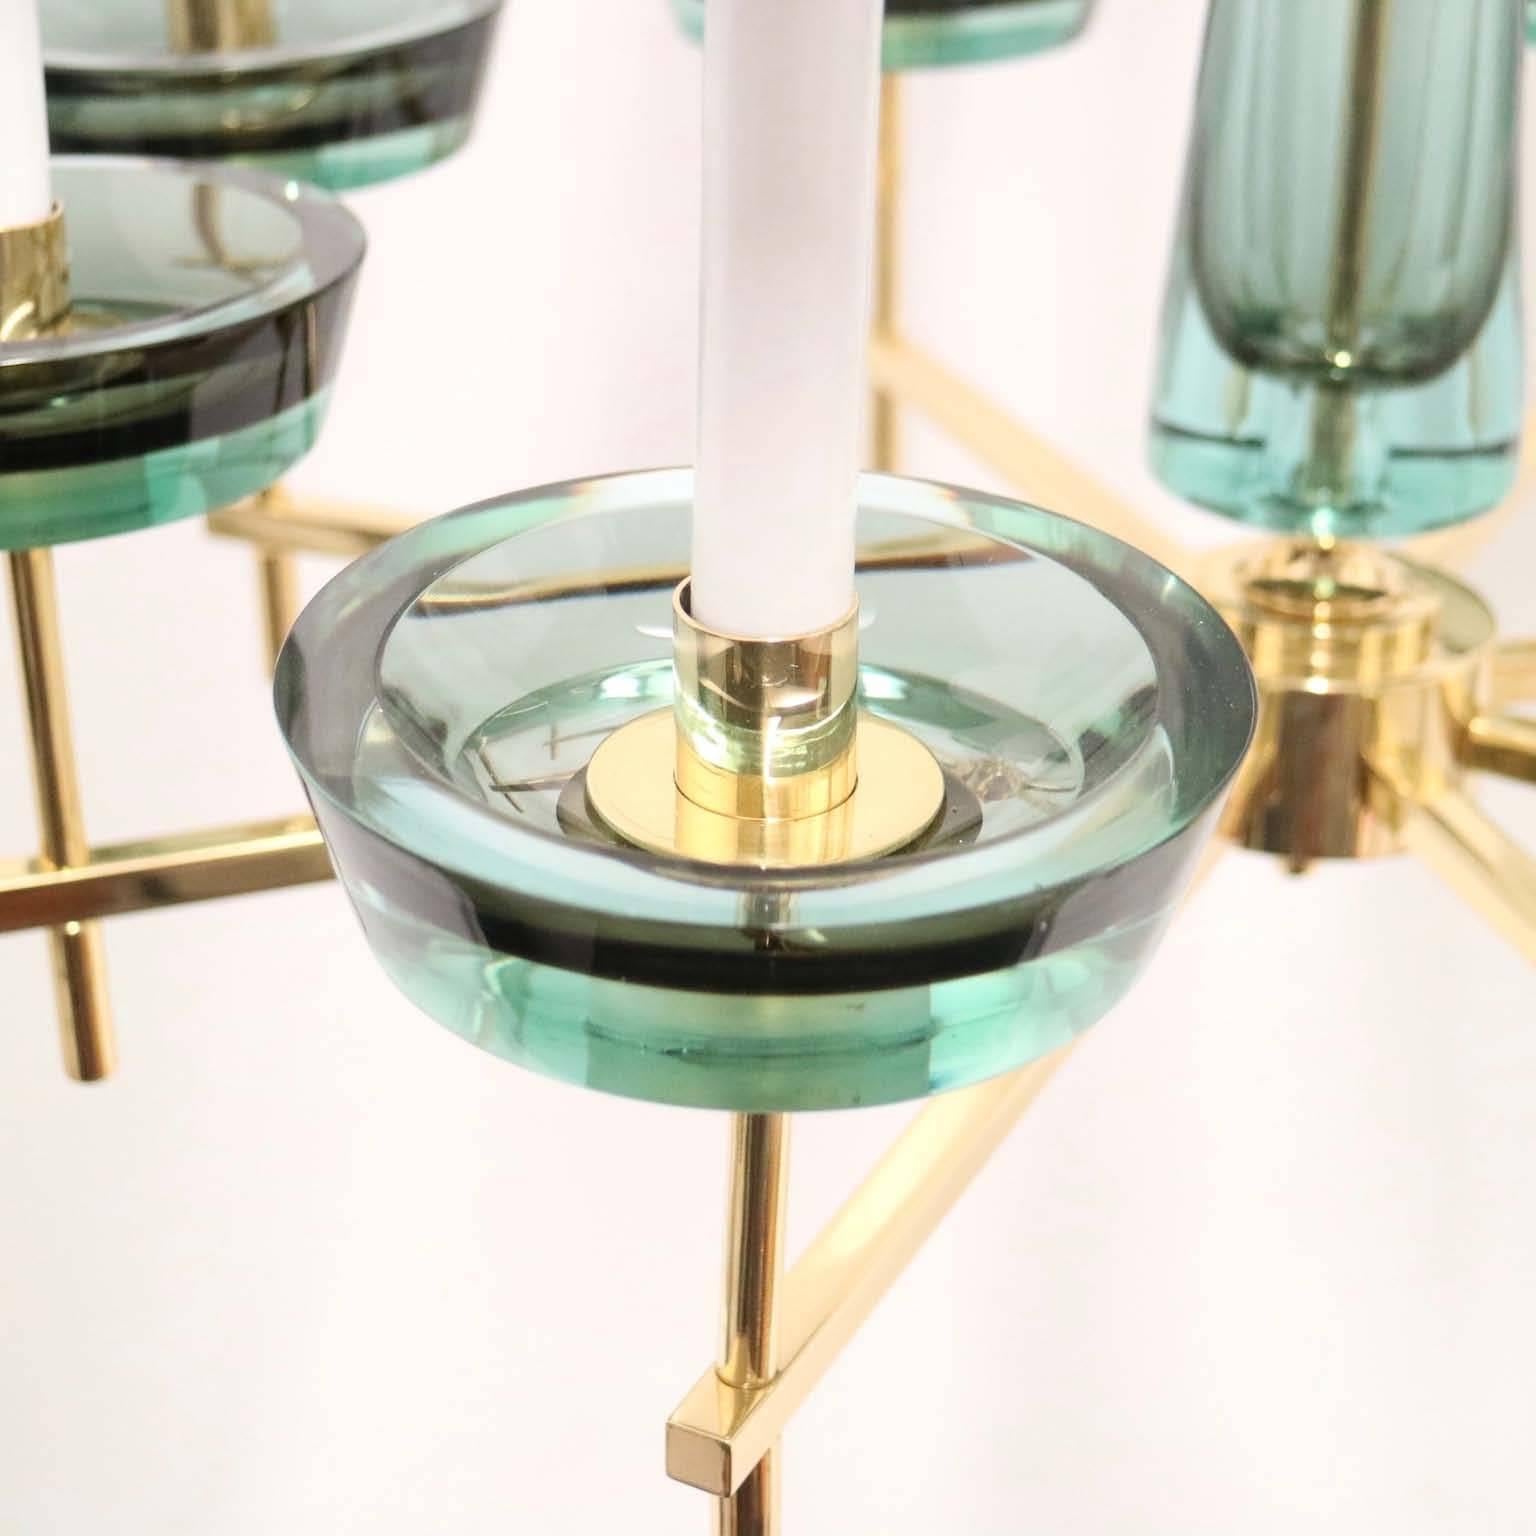 Mid-Century Modern chandelier, attributed to Seguso, with brass frame supporting Alexandrite Murano glass in the Sommerso technique, changing i color in different lighting conditions. Alexandrite will be a pale green under fluorescent lighting and